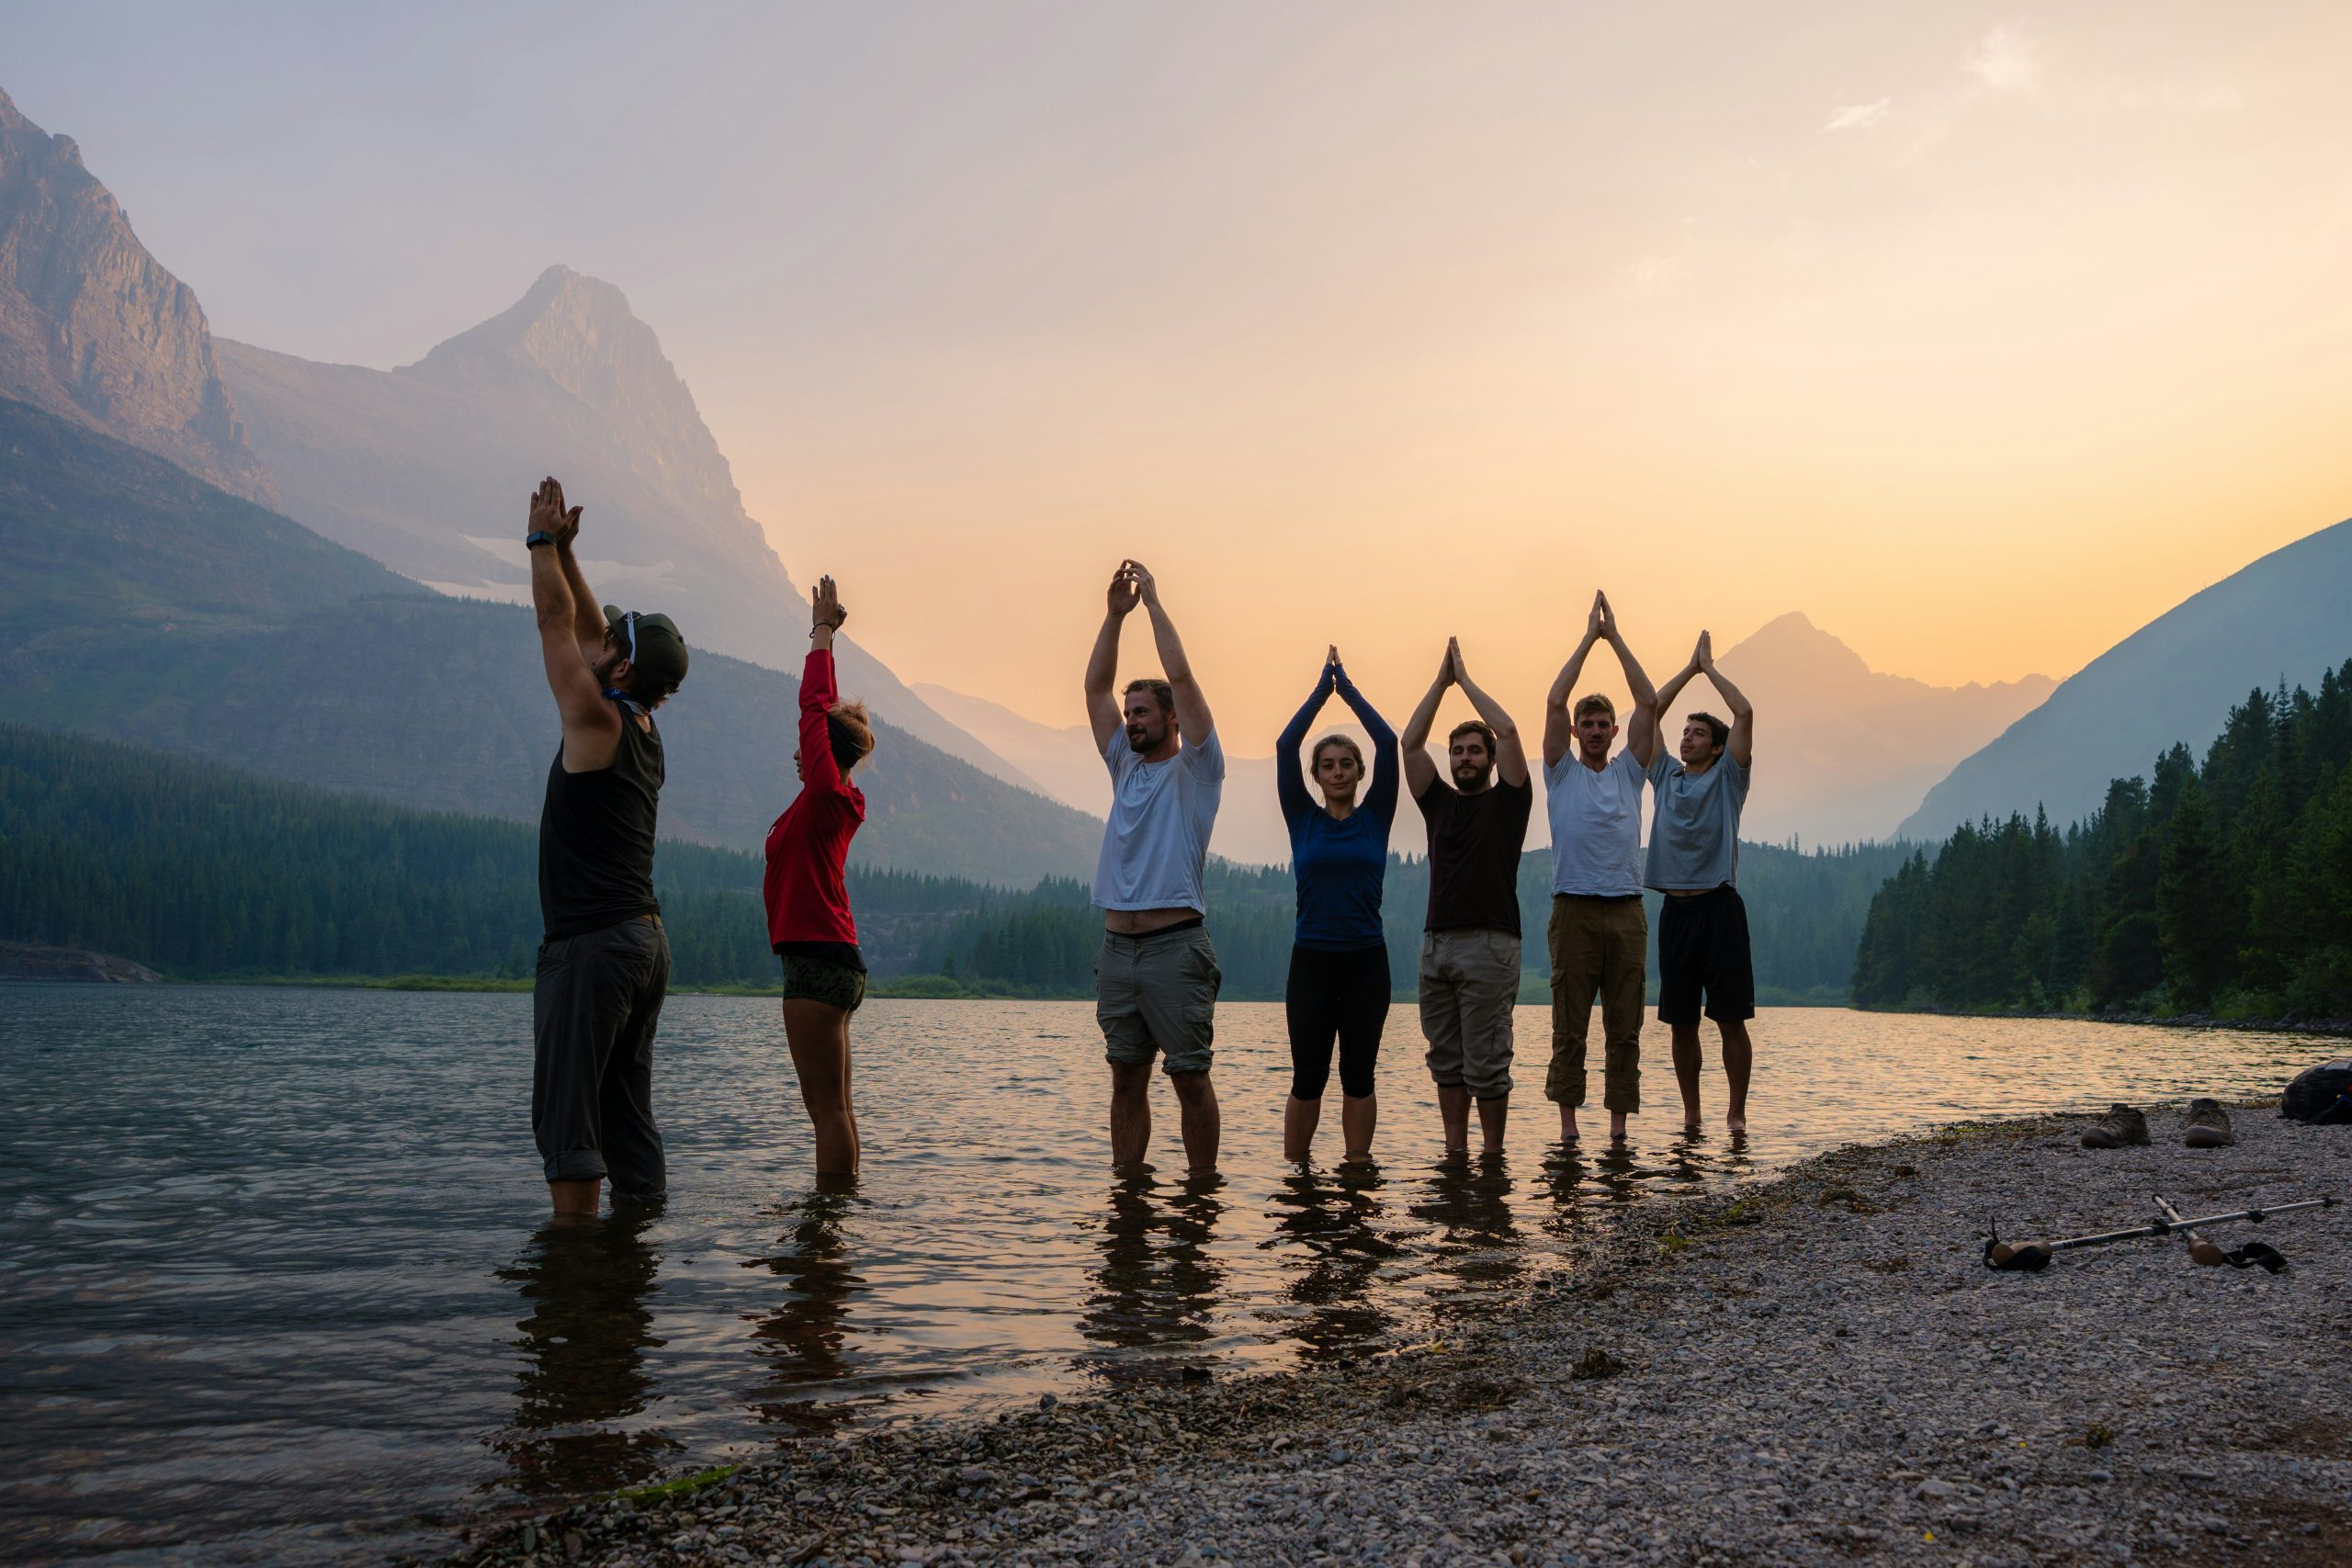 explore the best yoga retreats around the world and rejuvenate your mind, body, and soul with immersive experiences in stunning natural settings.